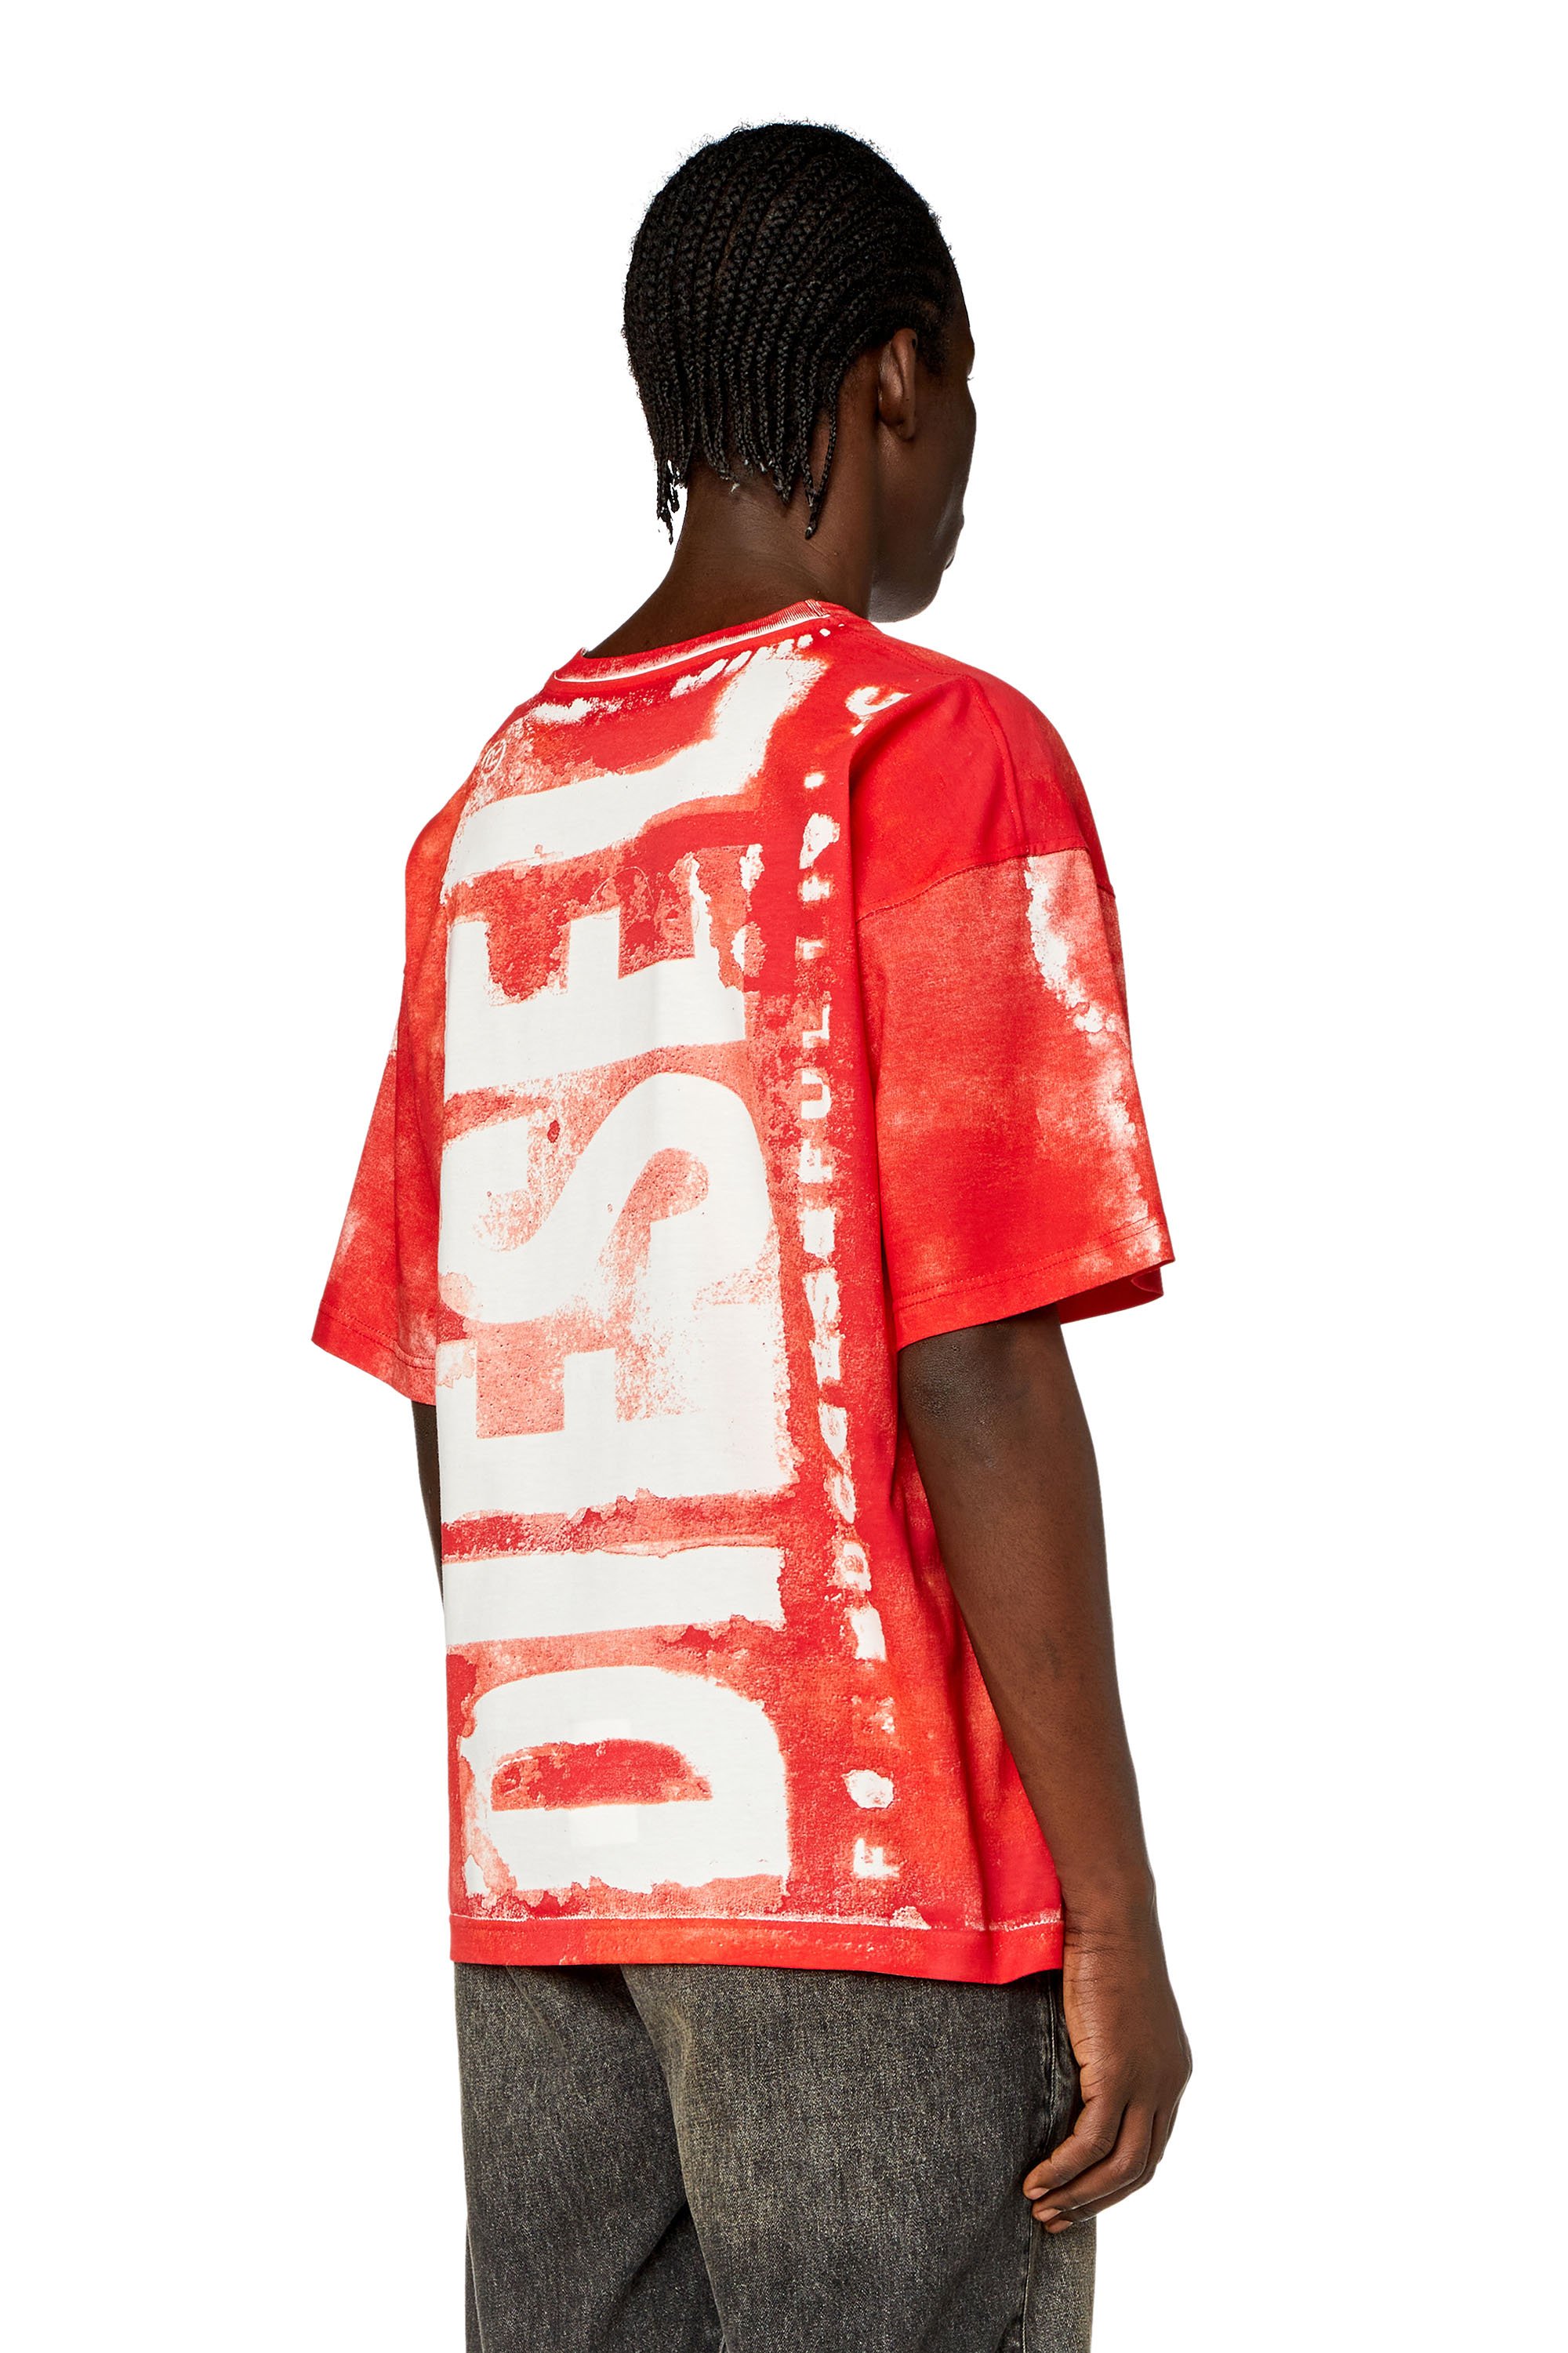 Diesel - T-BOXT-BISC, Red - Image 3